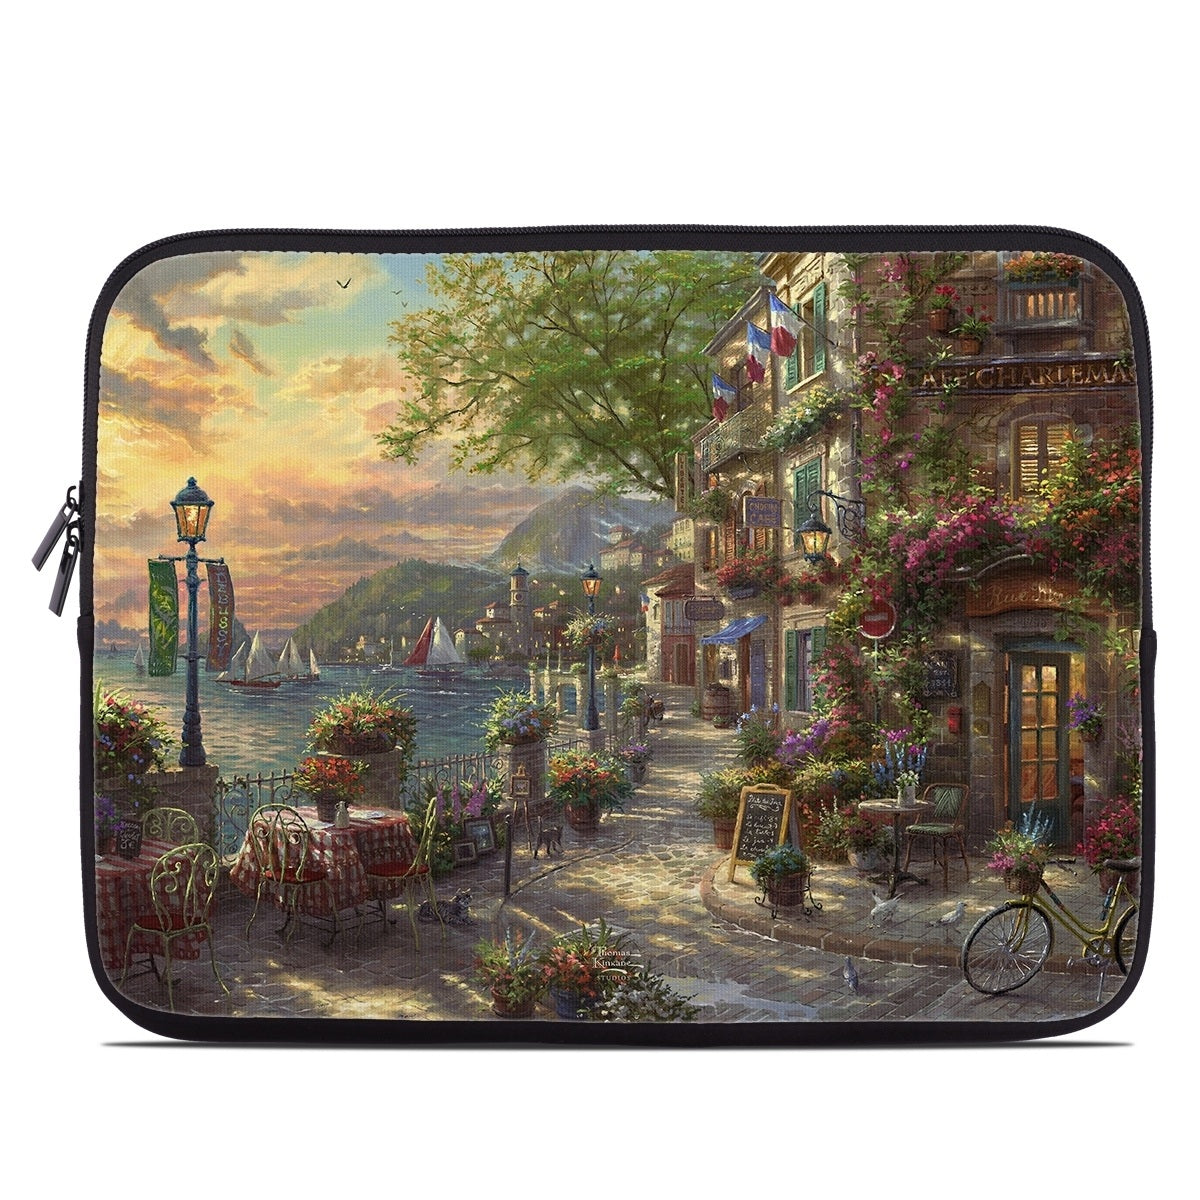 French Riviera Cafe - Laptop Sleeve